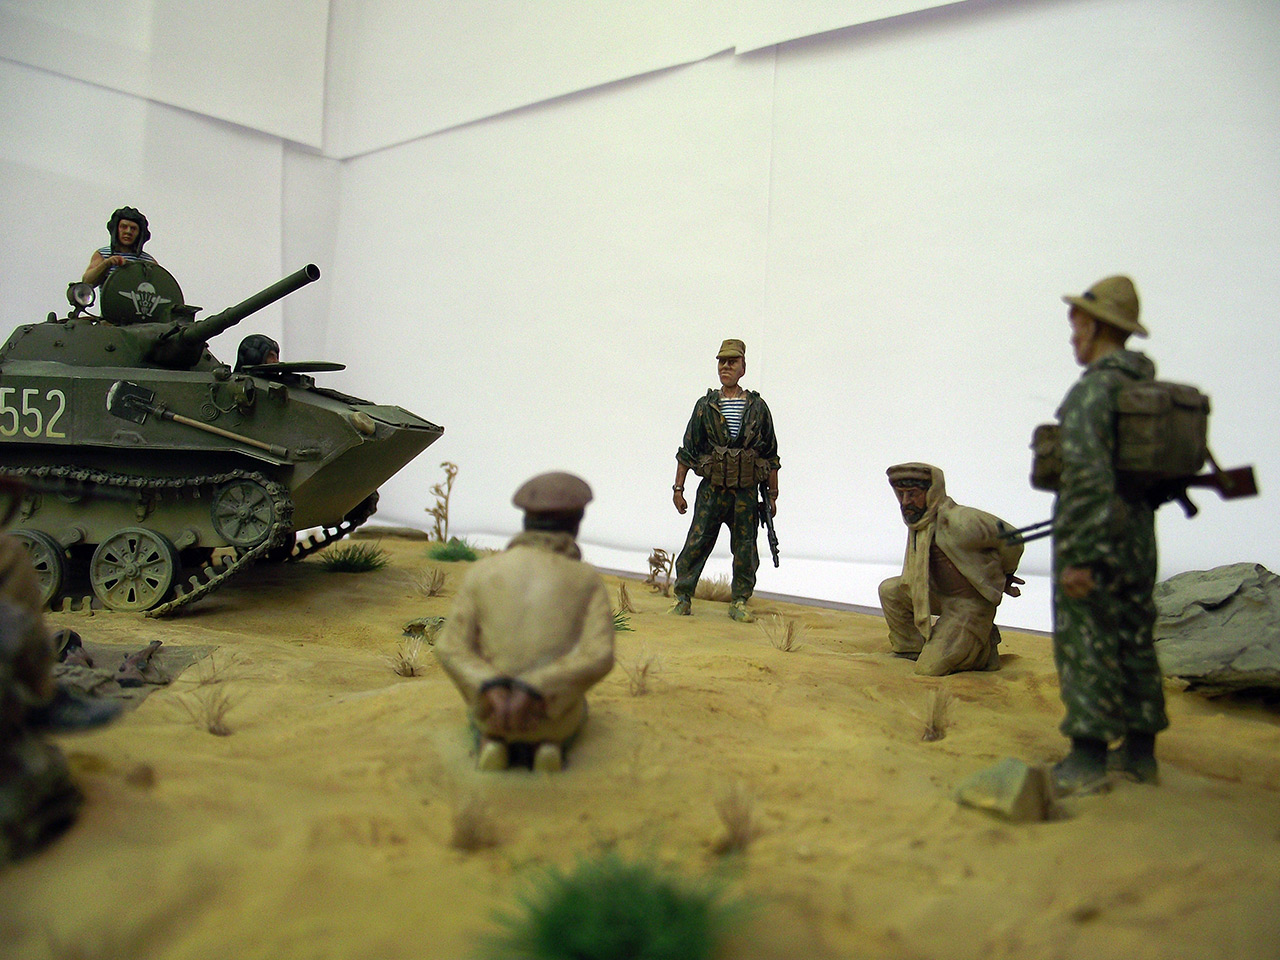 Dioramas and Vignettes: Ask the desert..., photo #16